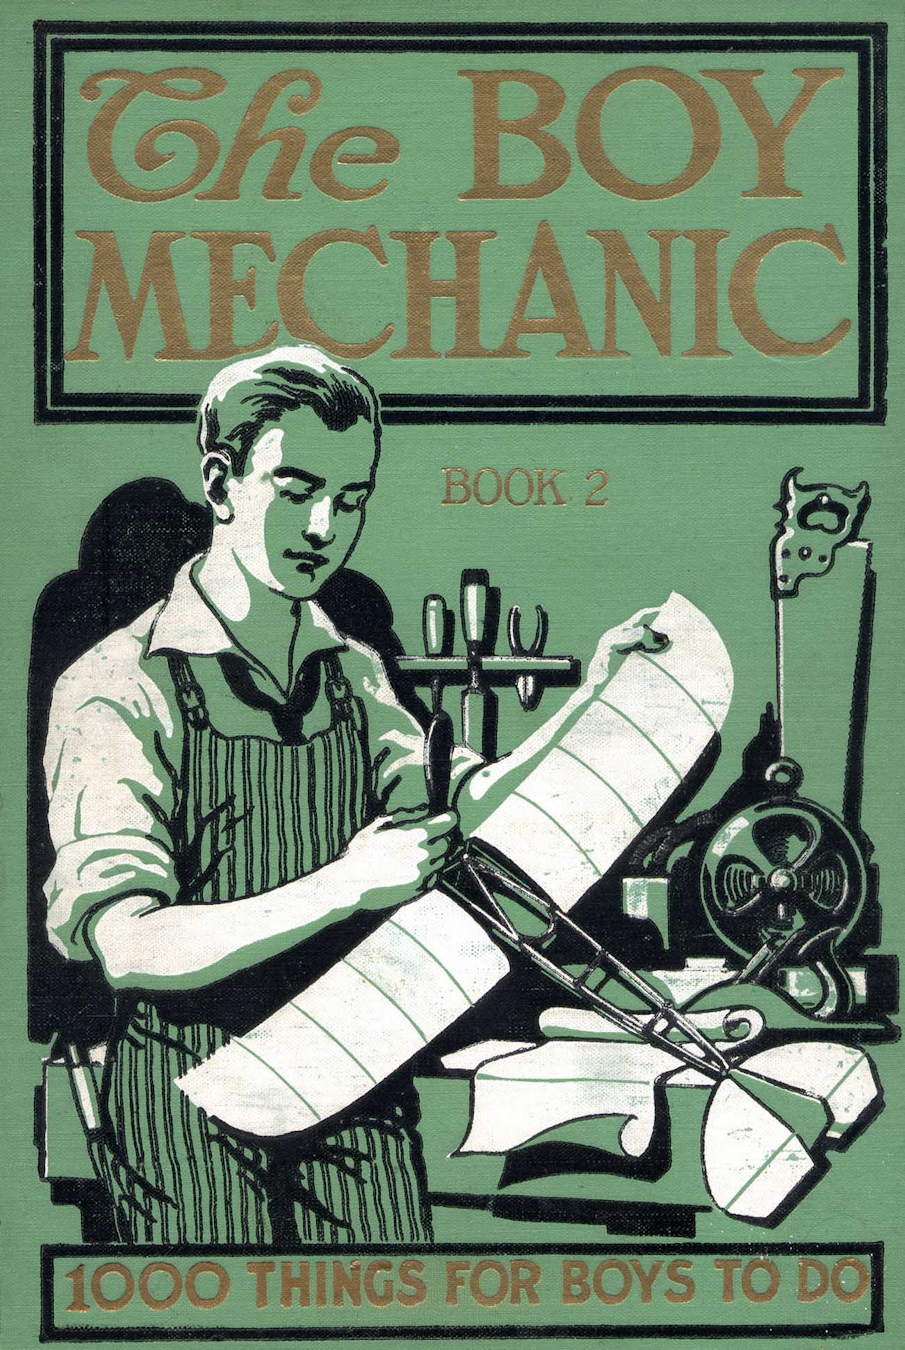 The Boy Mechanic, Book 2: 1000 Things for Boys to Do